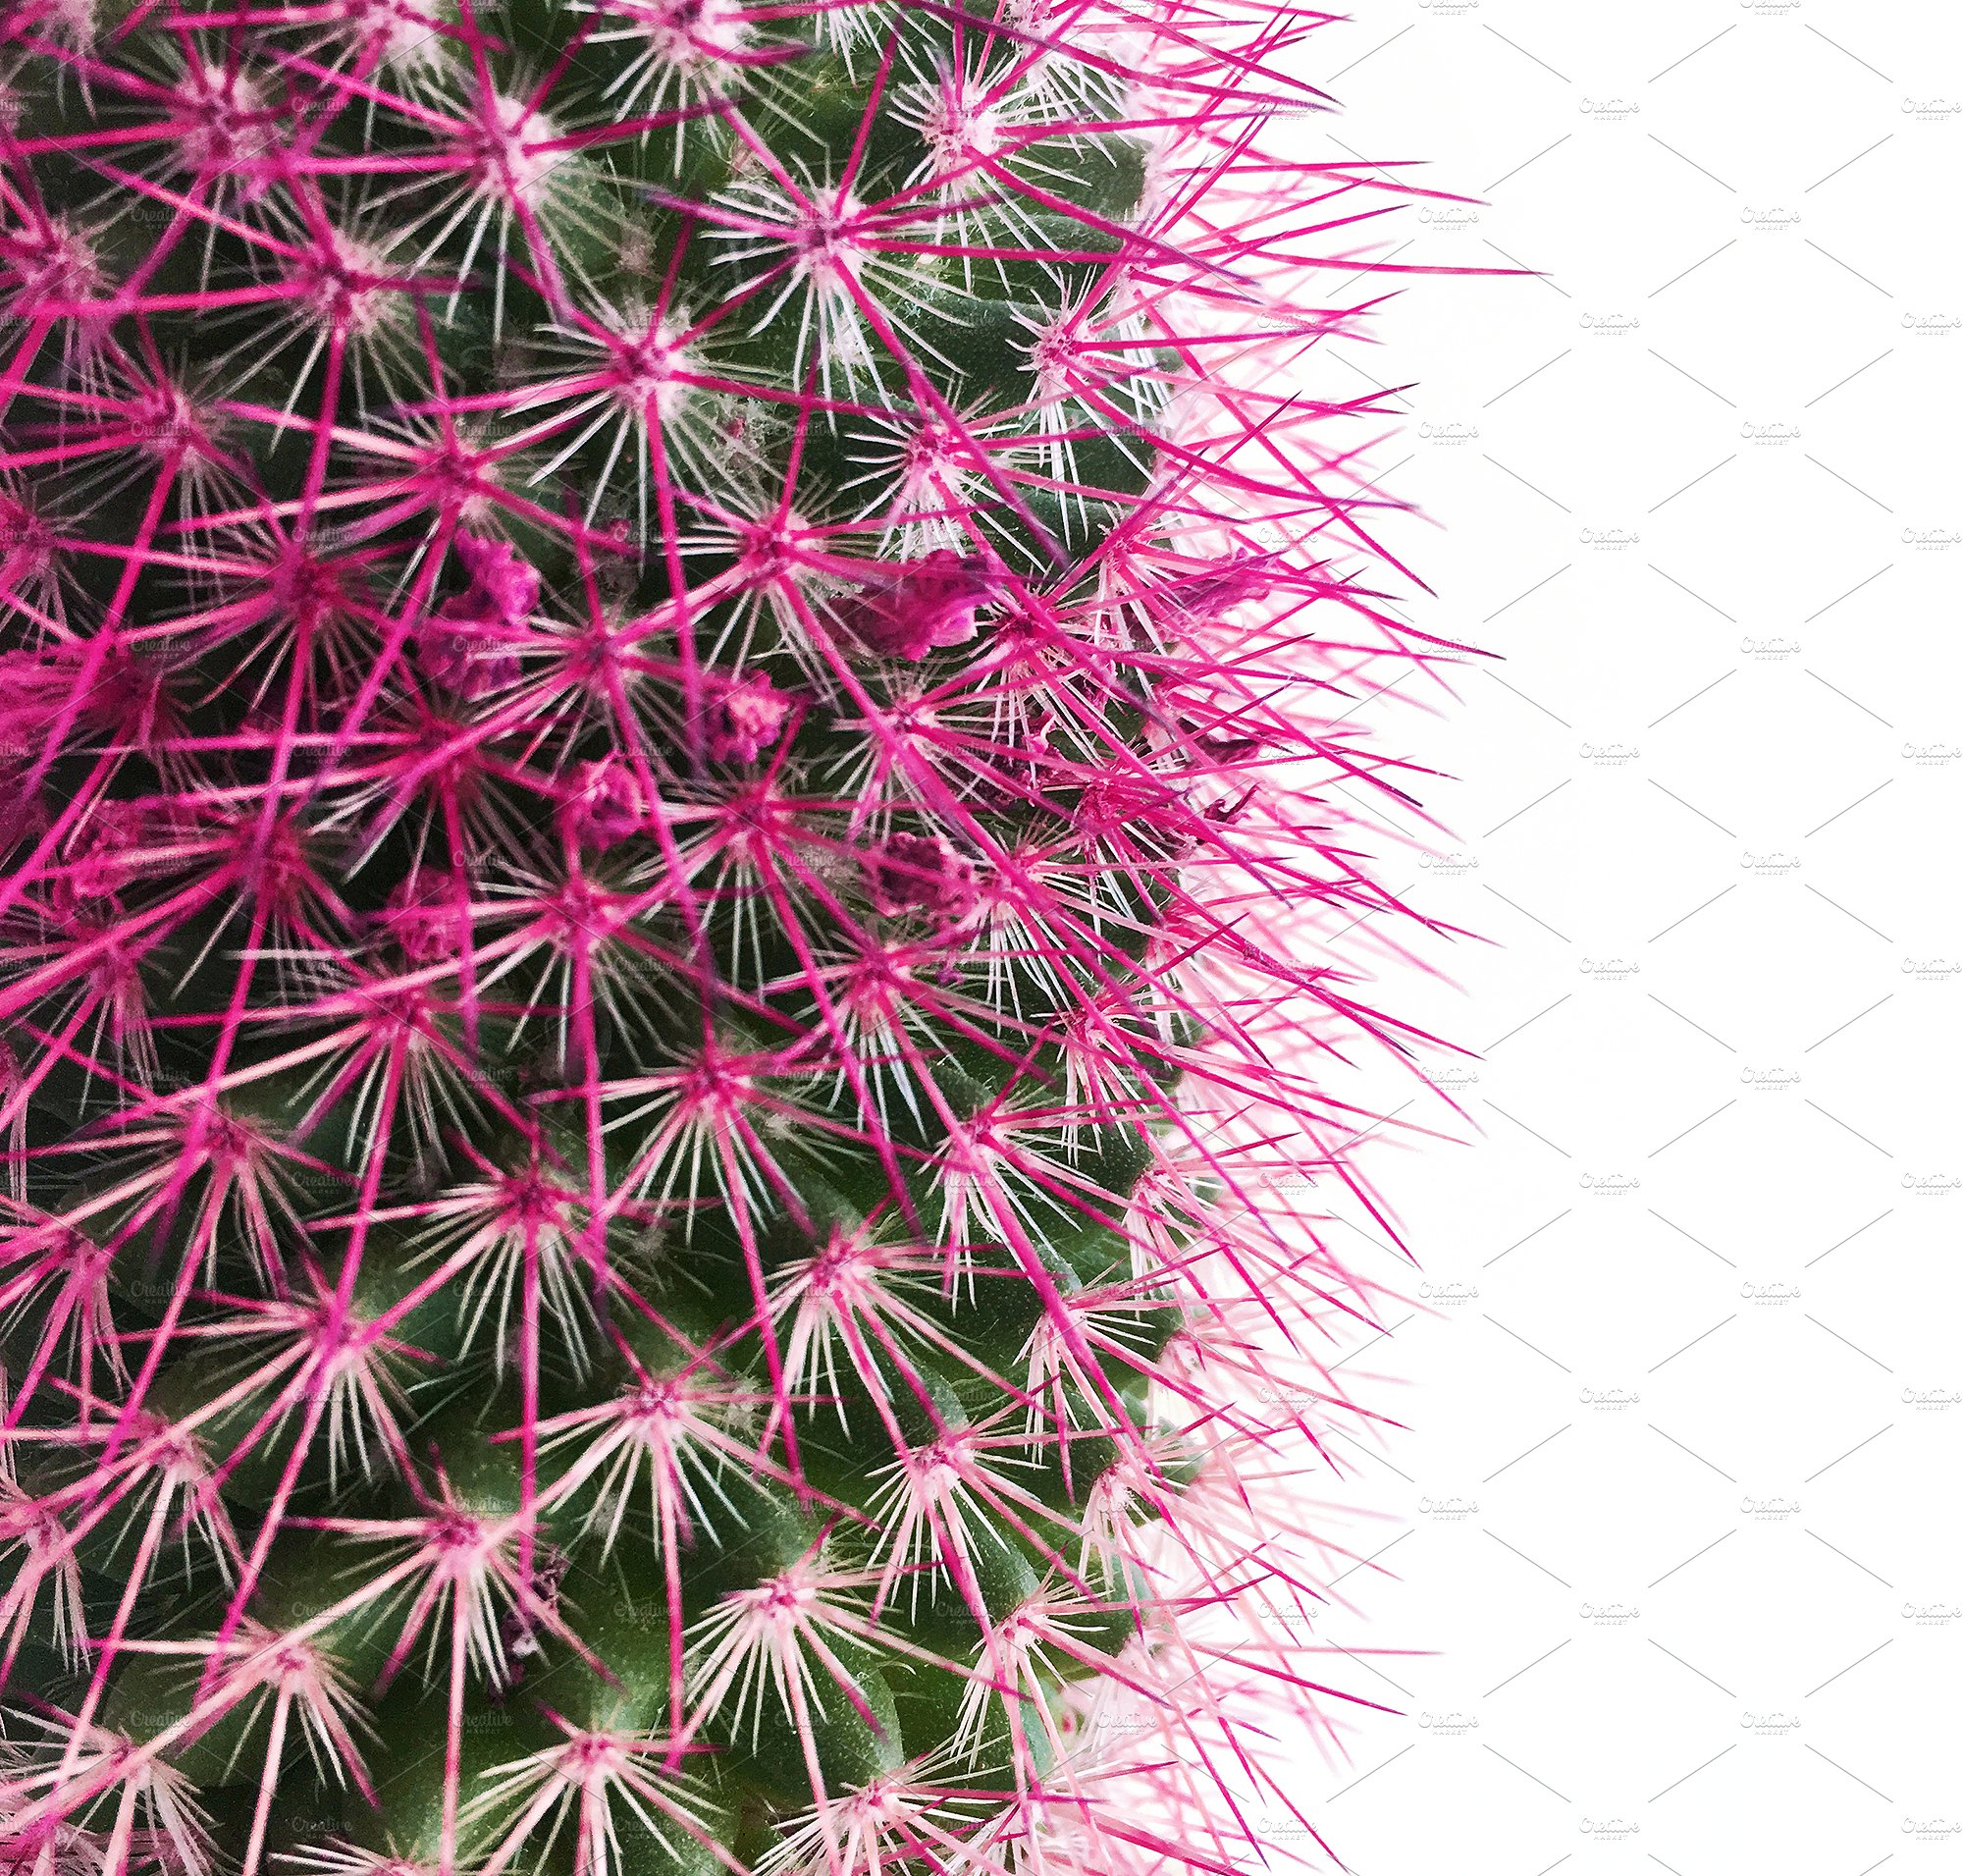 Detail of Cactus with Pink Spines ~ Arts & Entertainment Photos ...